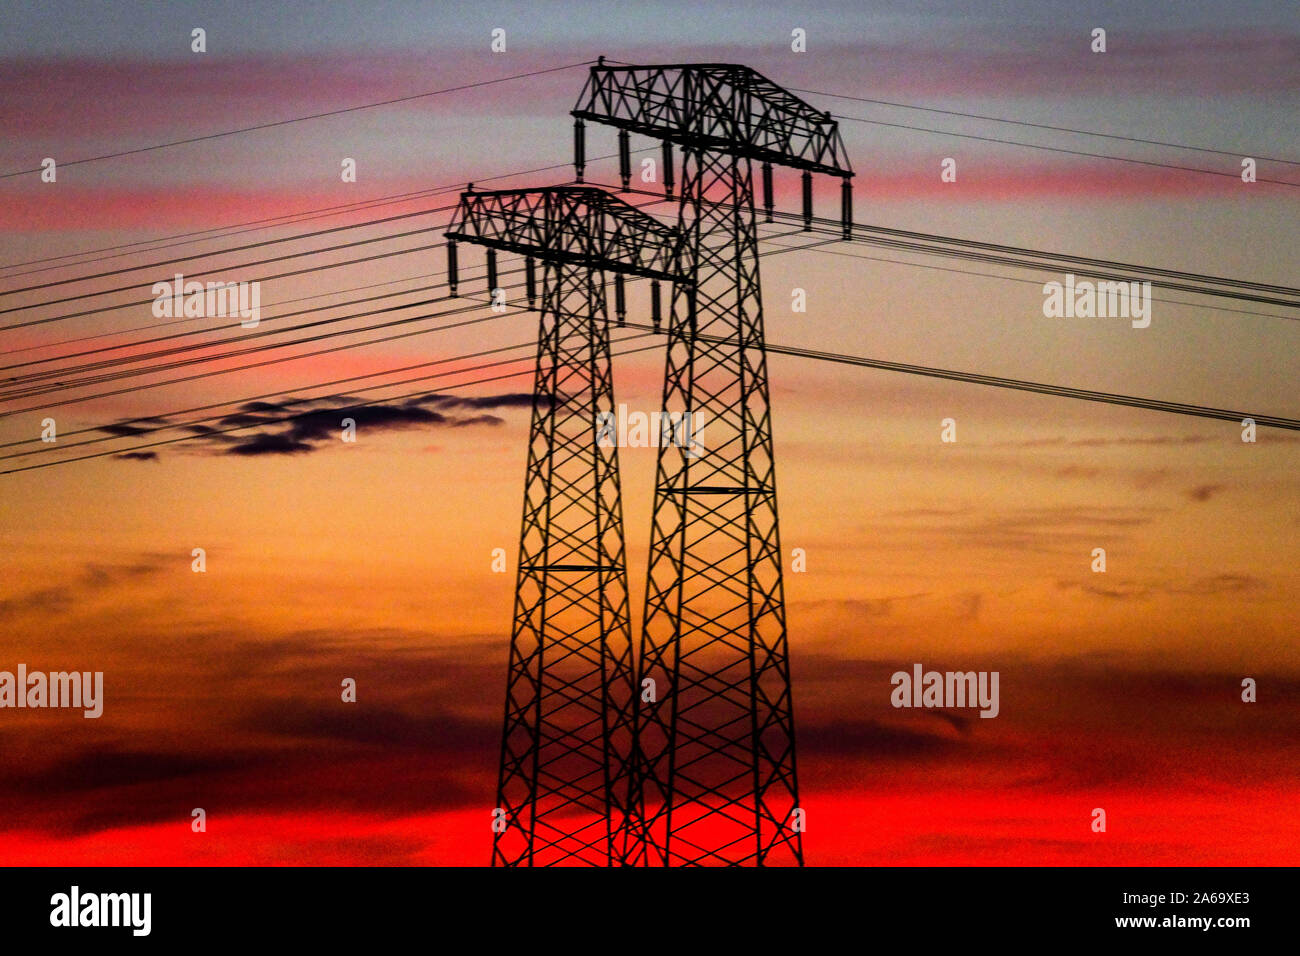 High voltage power lines sunset pylons transmission energy Germany Global warming climate change Sky wires connected to a plant Stock Photo